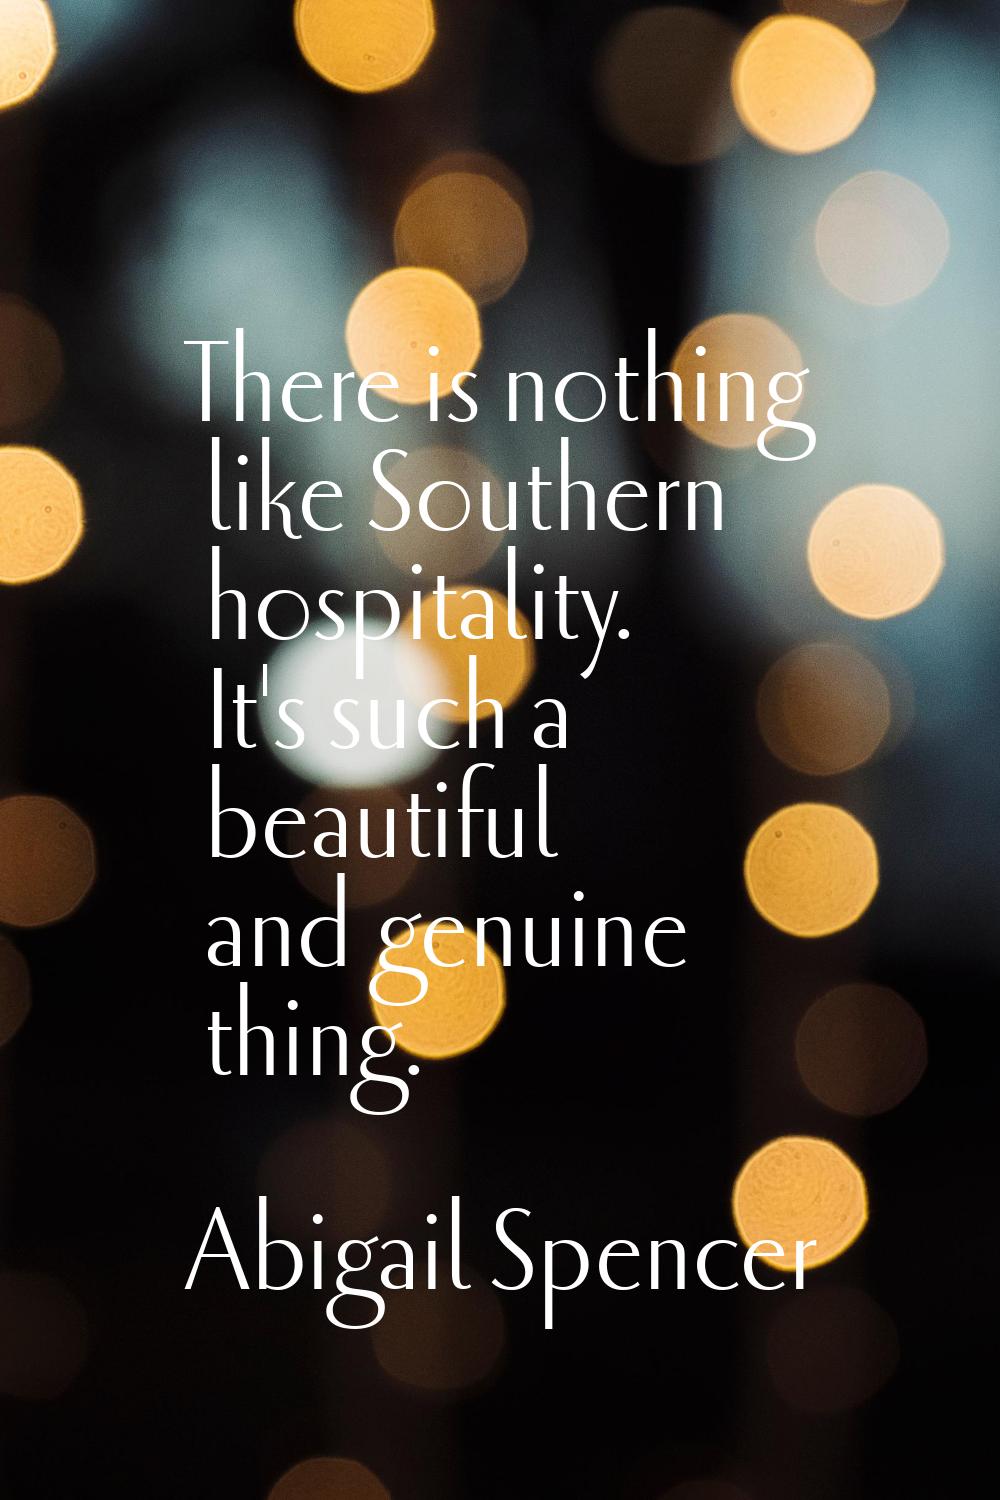 There is nothing like Southern hospitality. It's such a beautiful and genuine thing.